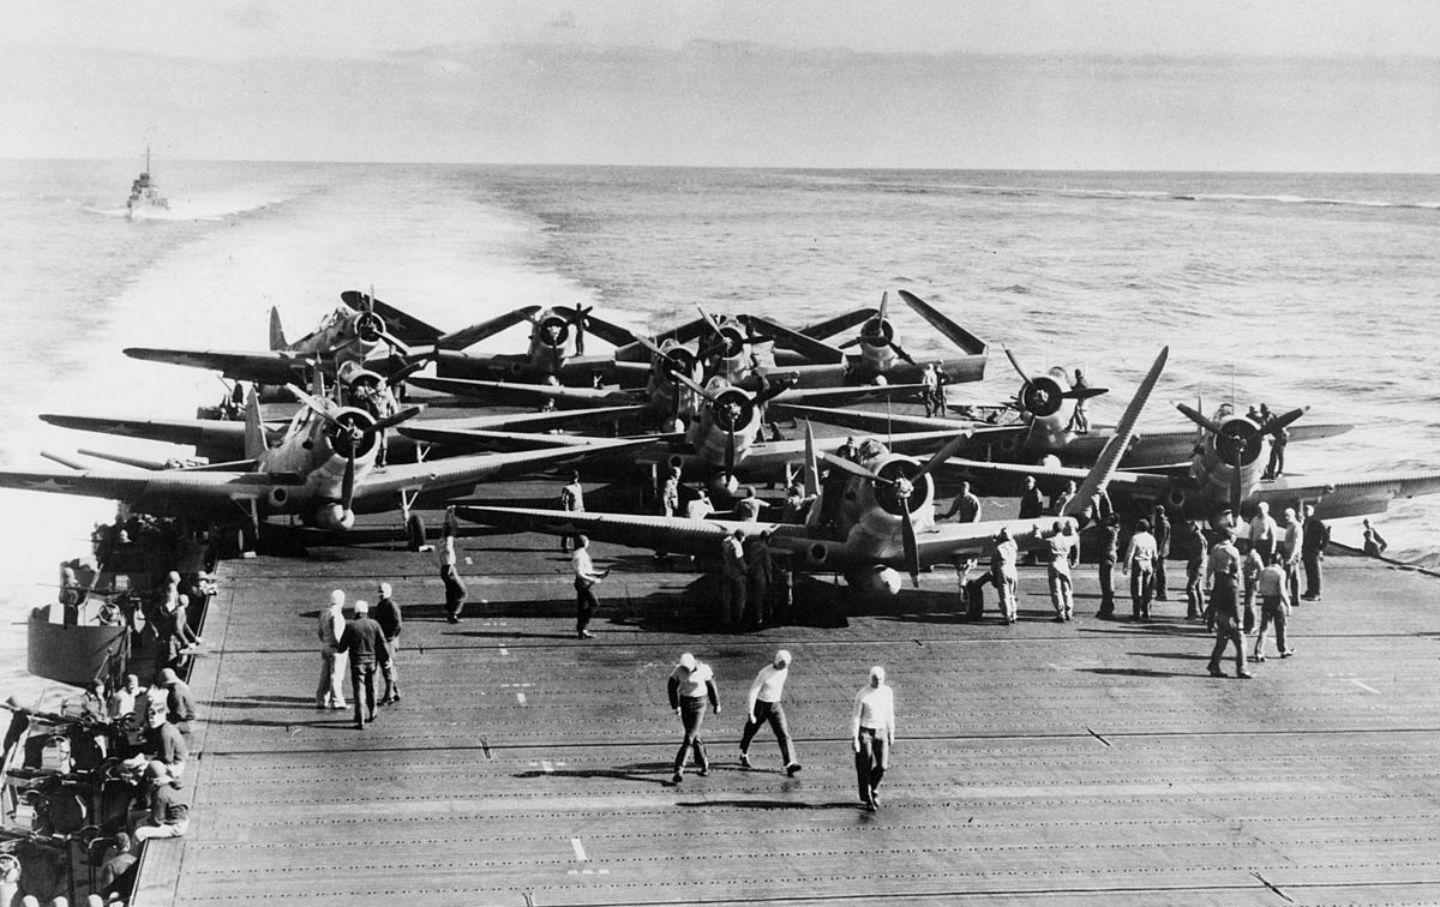 Battle of Midway Photos | Midway Island